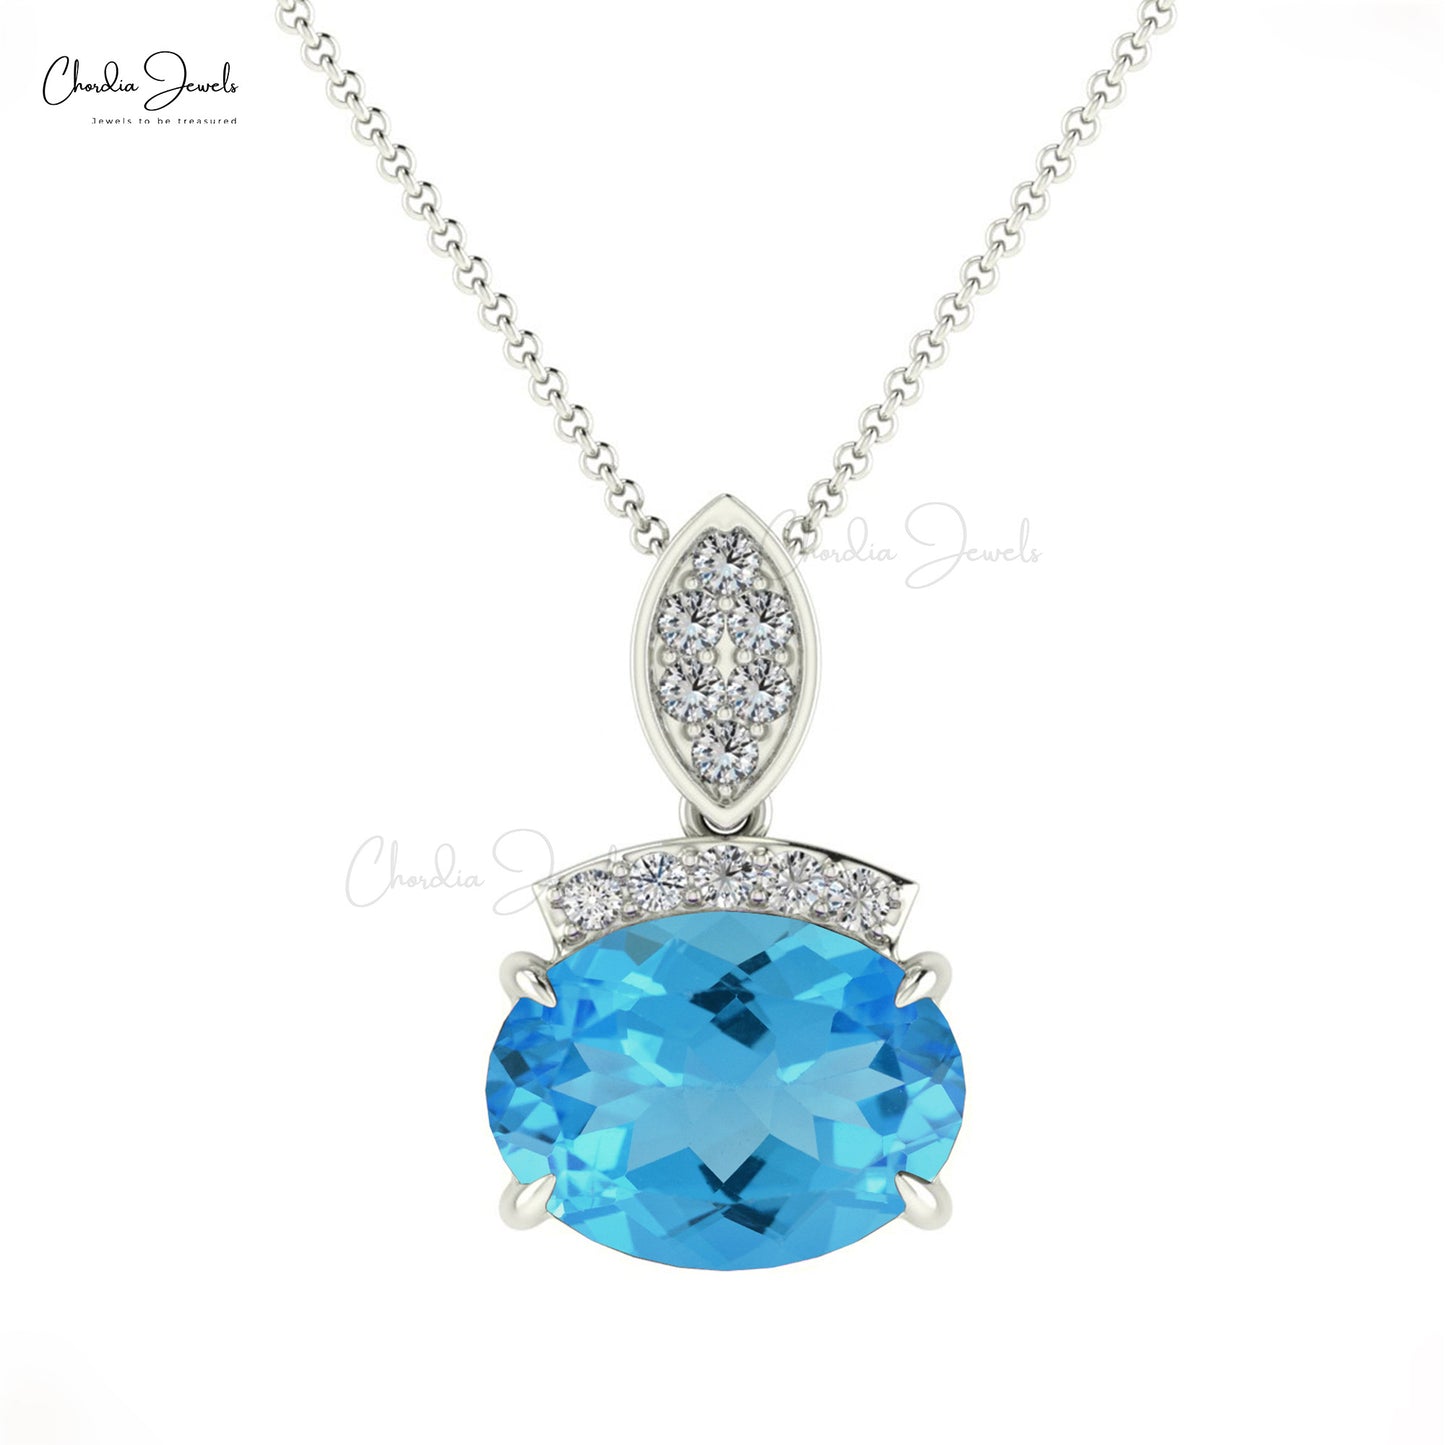 AAA Quality Swiss Blue Topaz Dainty Pendant for Her in 14K Gold